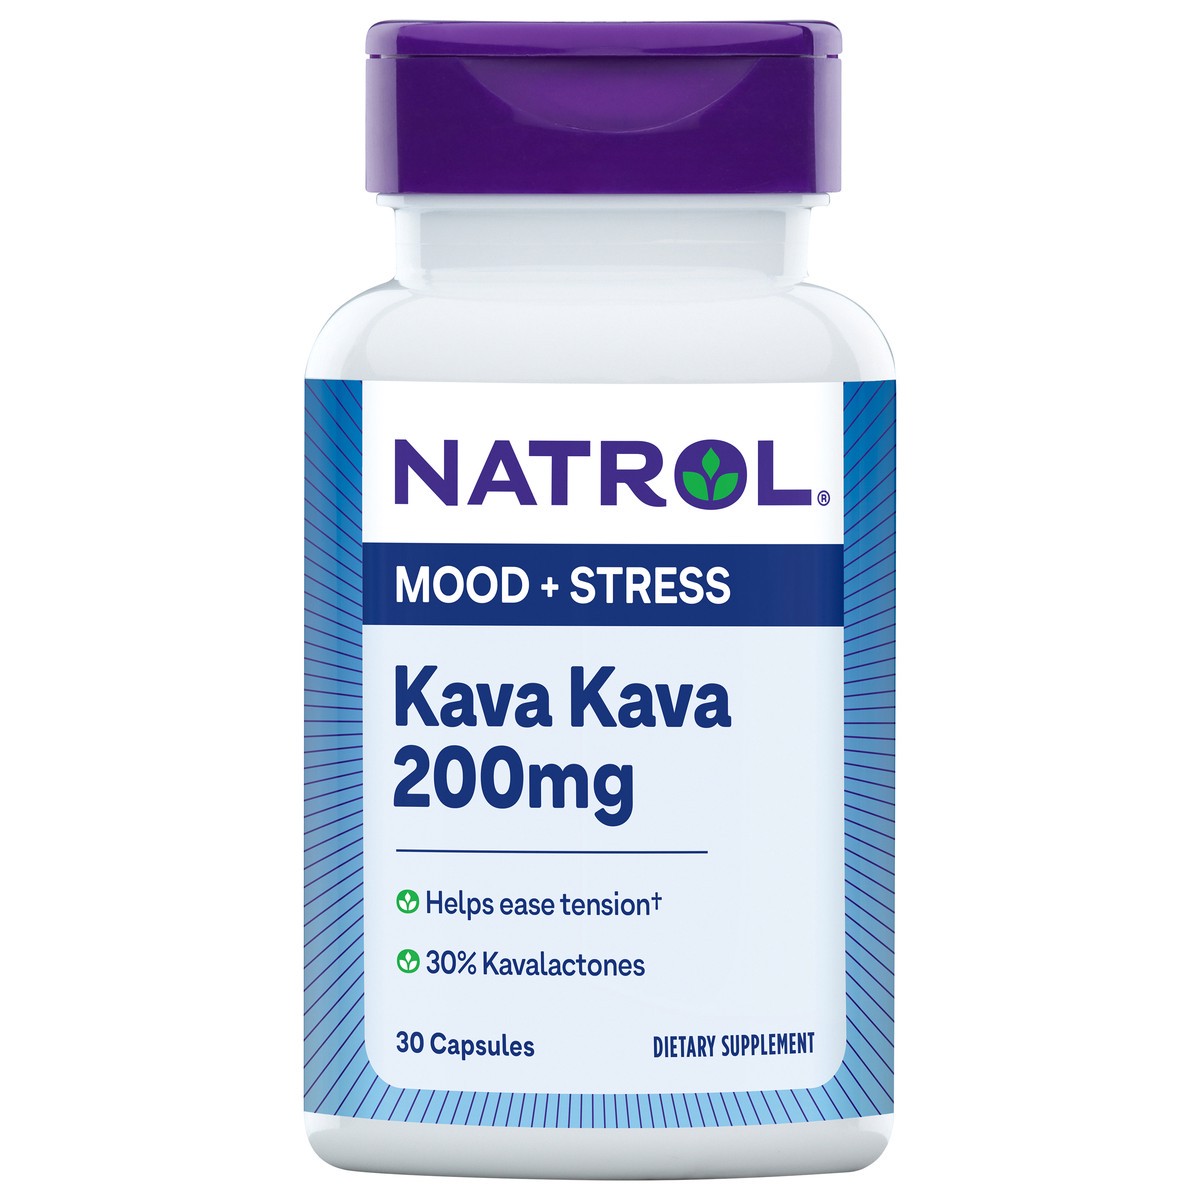 slide 1 of 8, Natrol Mood & Stress Kava Kava 200mg, Dietary Supplement for Relaxation and Eases Tension, 30 Capsules, 15-30 Day Supply, 30 ct